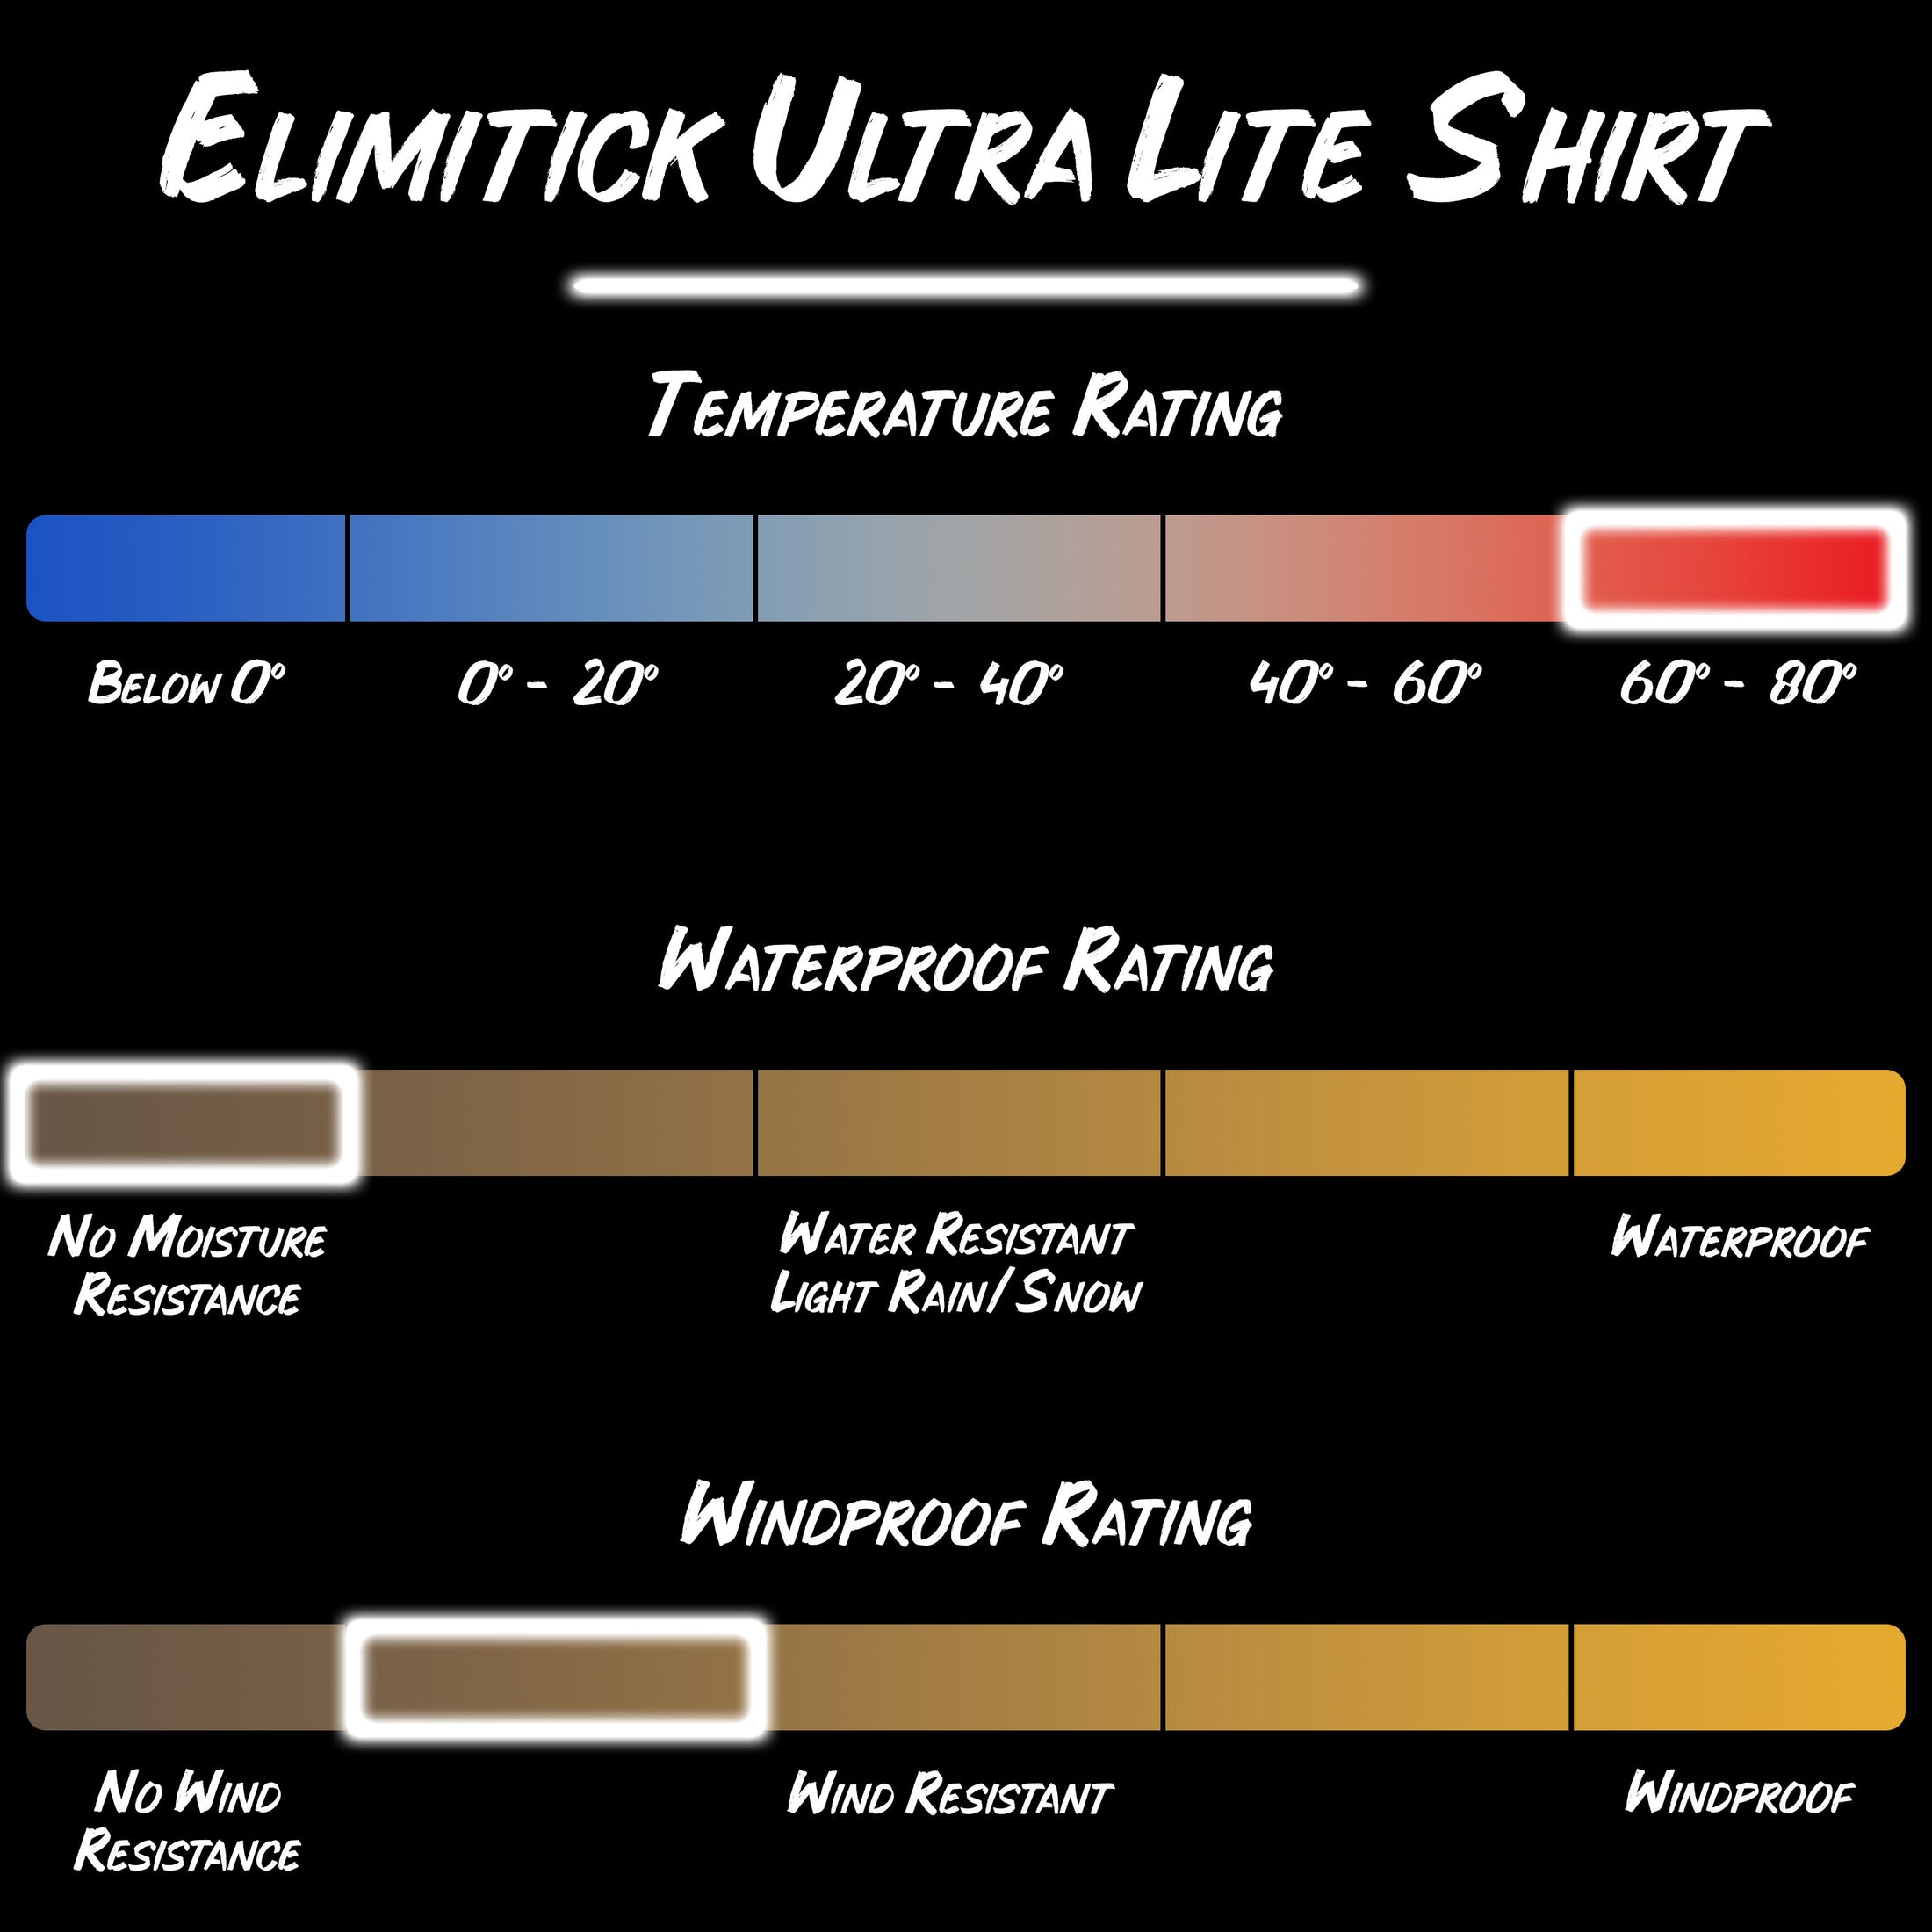 Elimitick ultra lite shirt product specifications